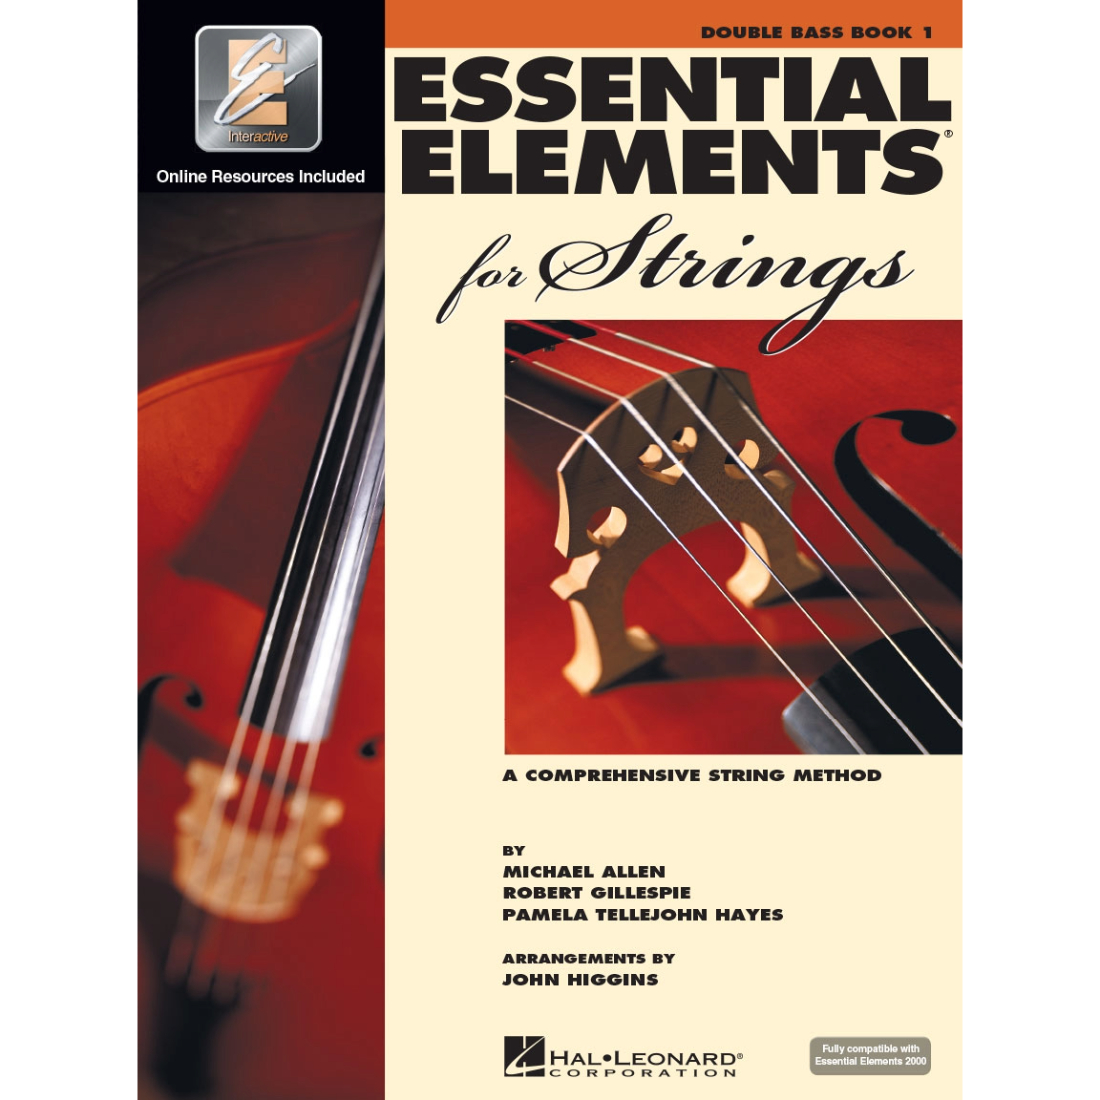 White cover with images of instruments, titled essential elements for strings book 1